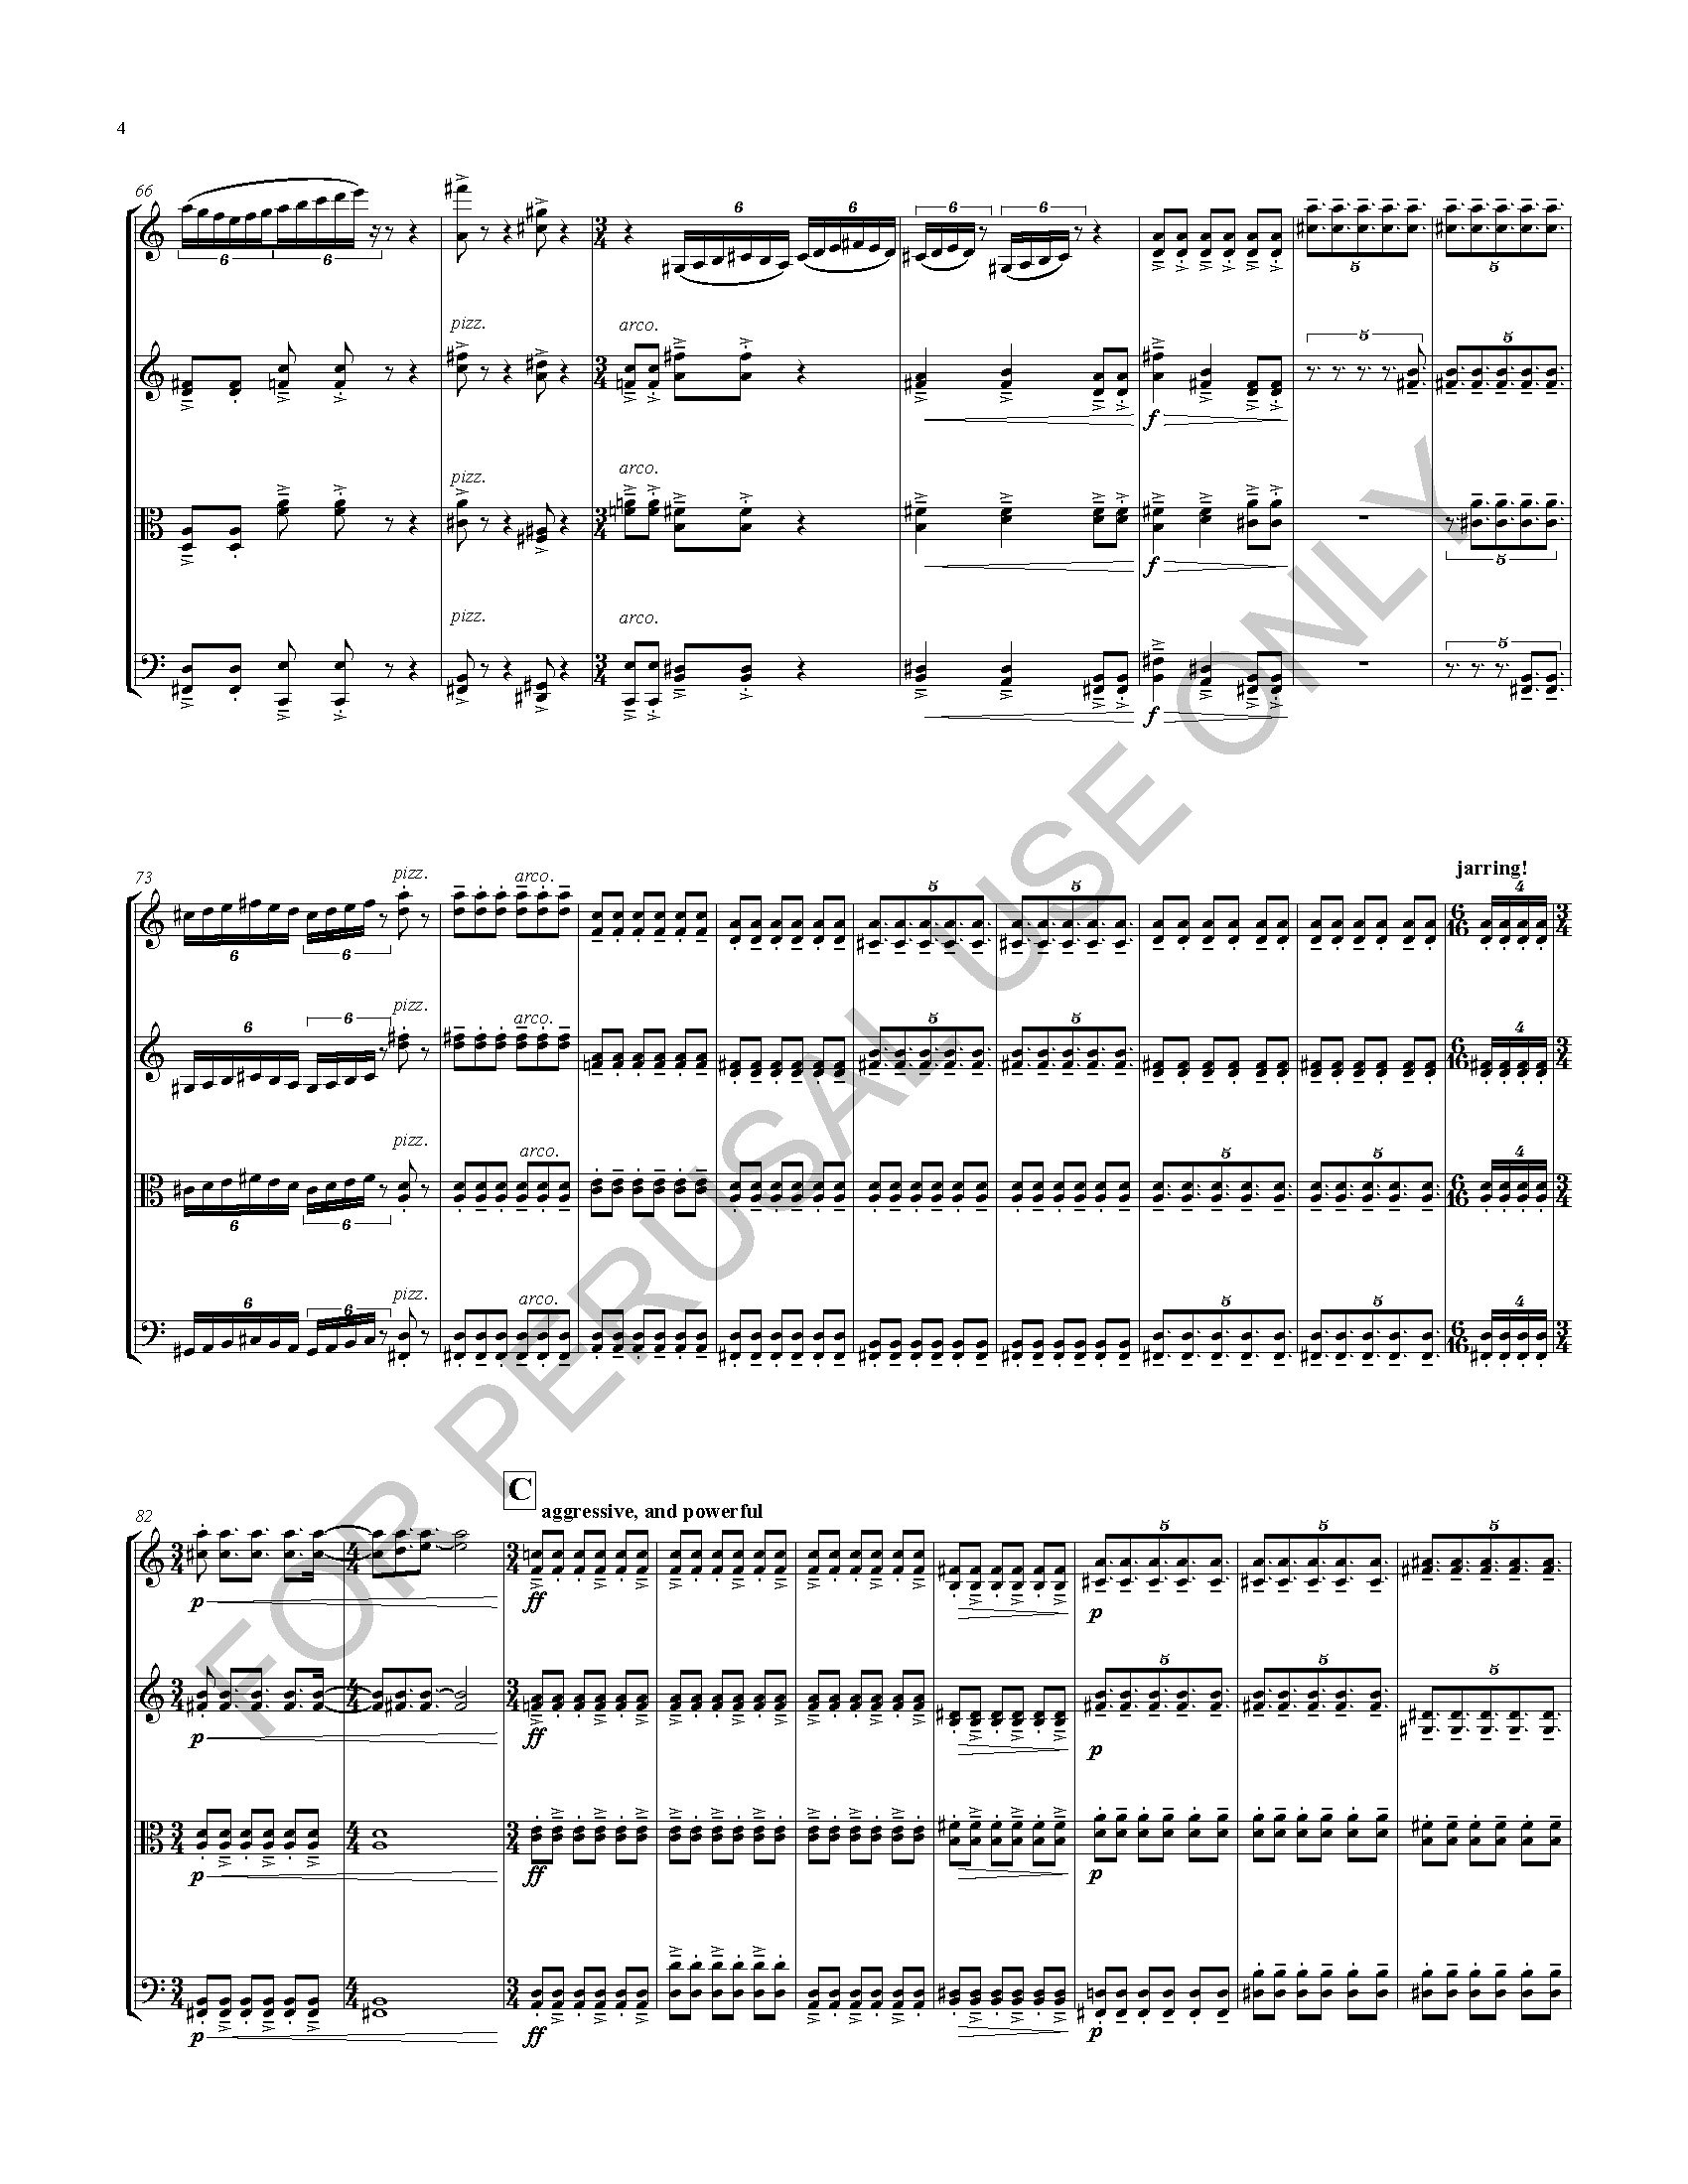 REFERENCE Smear Music (Full Score)_Page_04.jpg